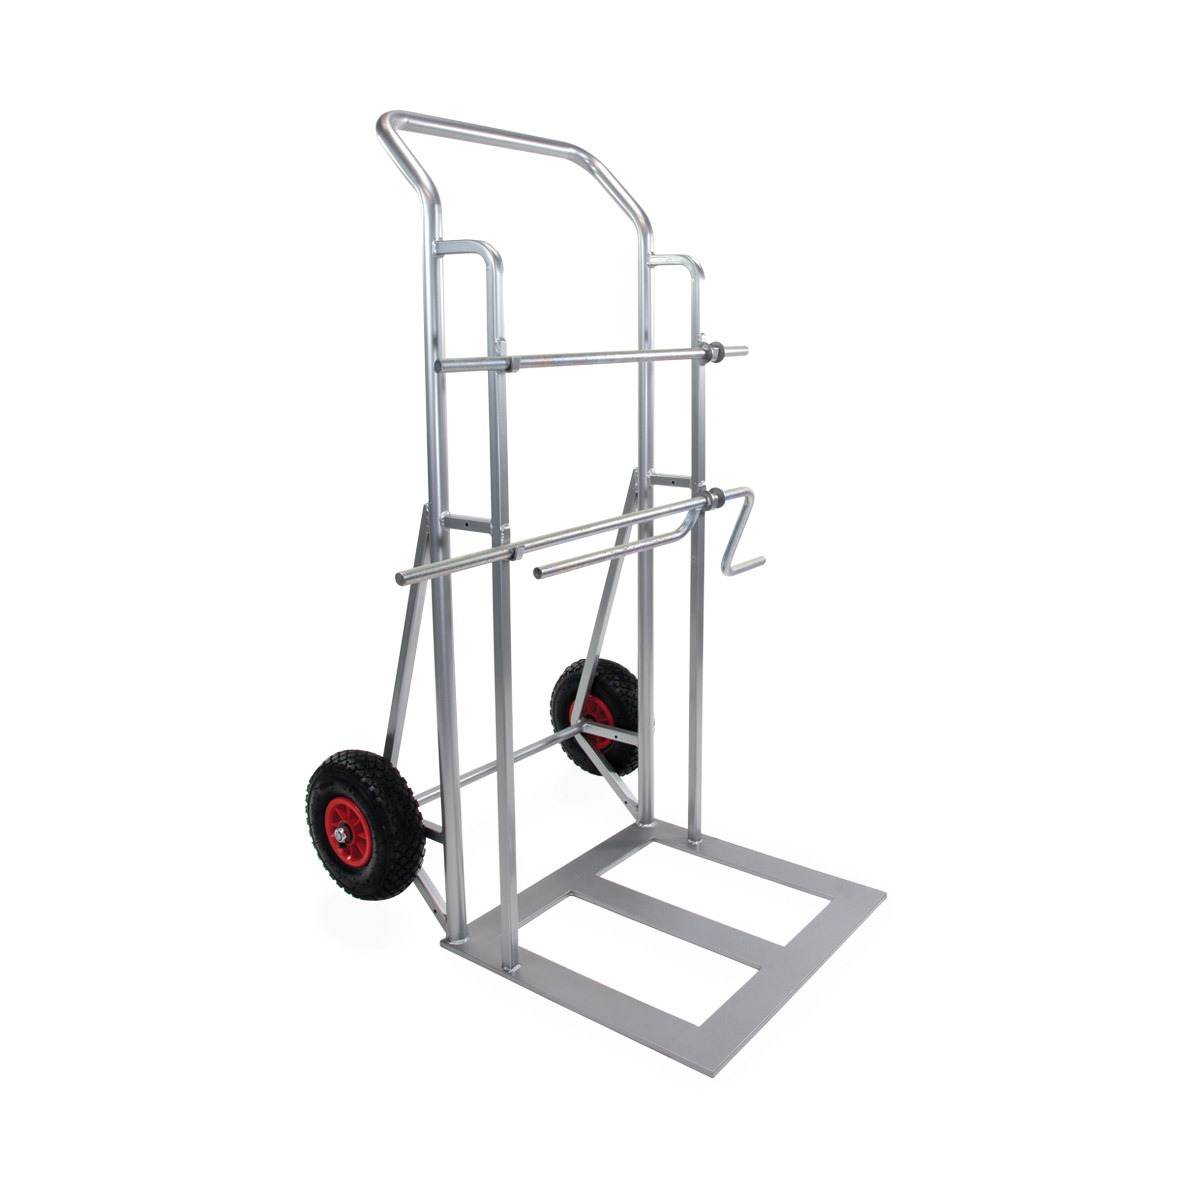 CANFORD SKELETON CABLE REEL TROLLEY, steel, powder coated